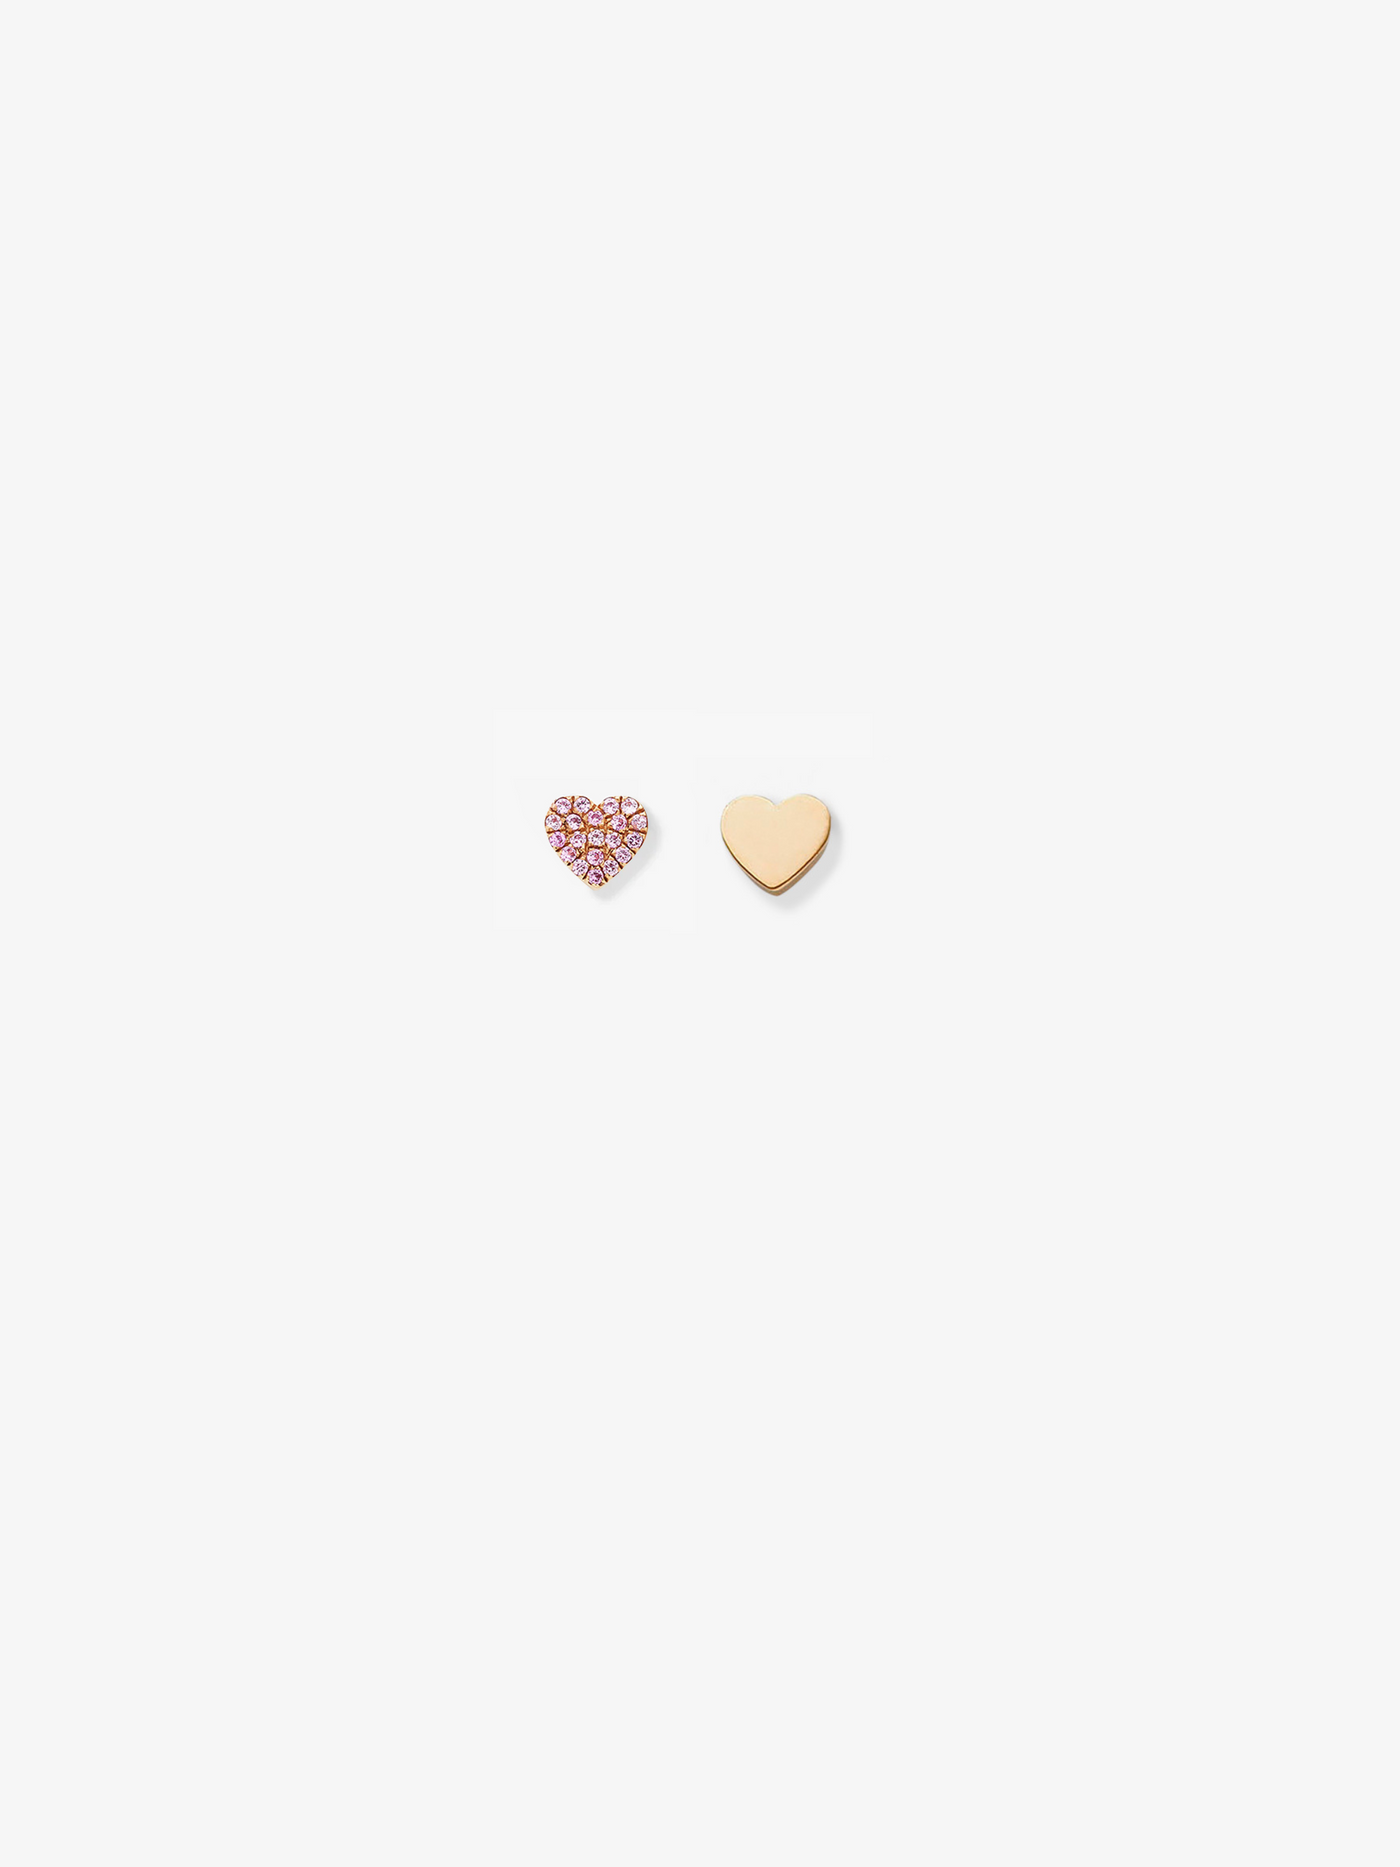 Heart Stud Earrings in Pink Sapphire and 18k Rose Gold